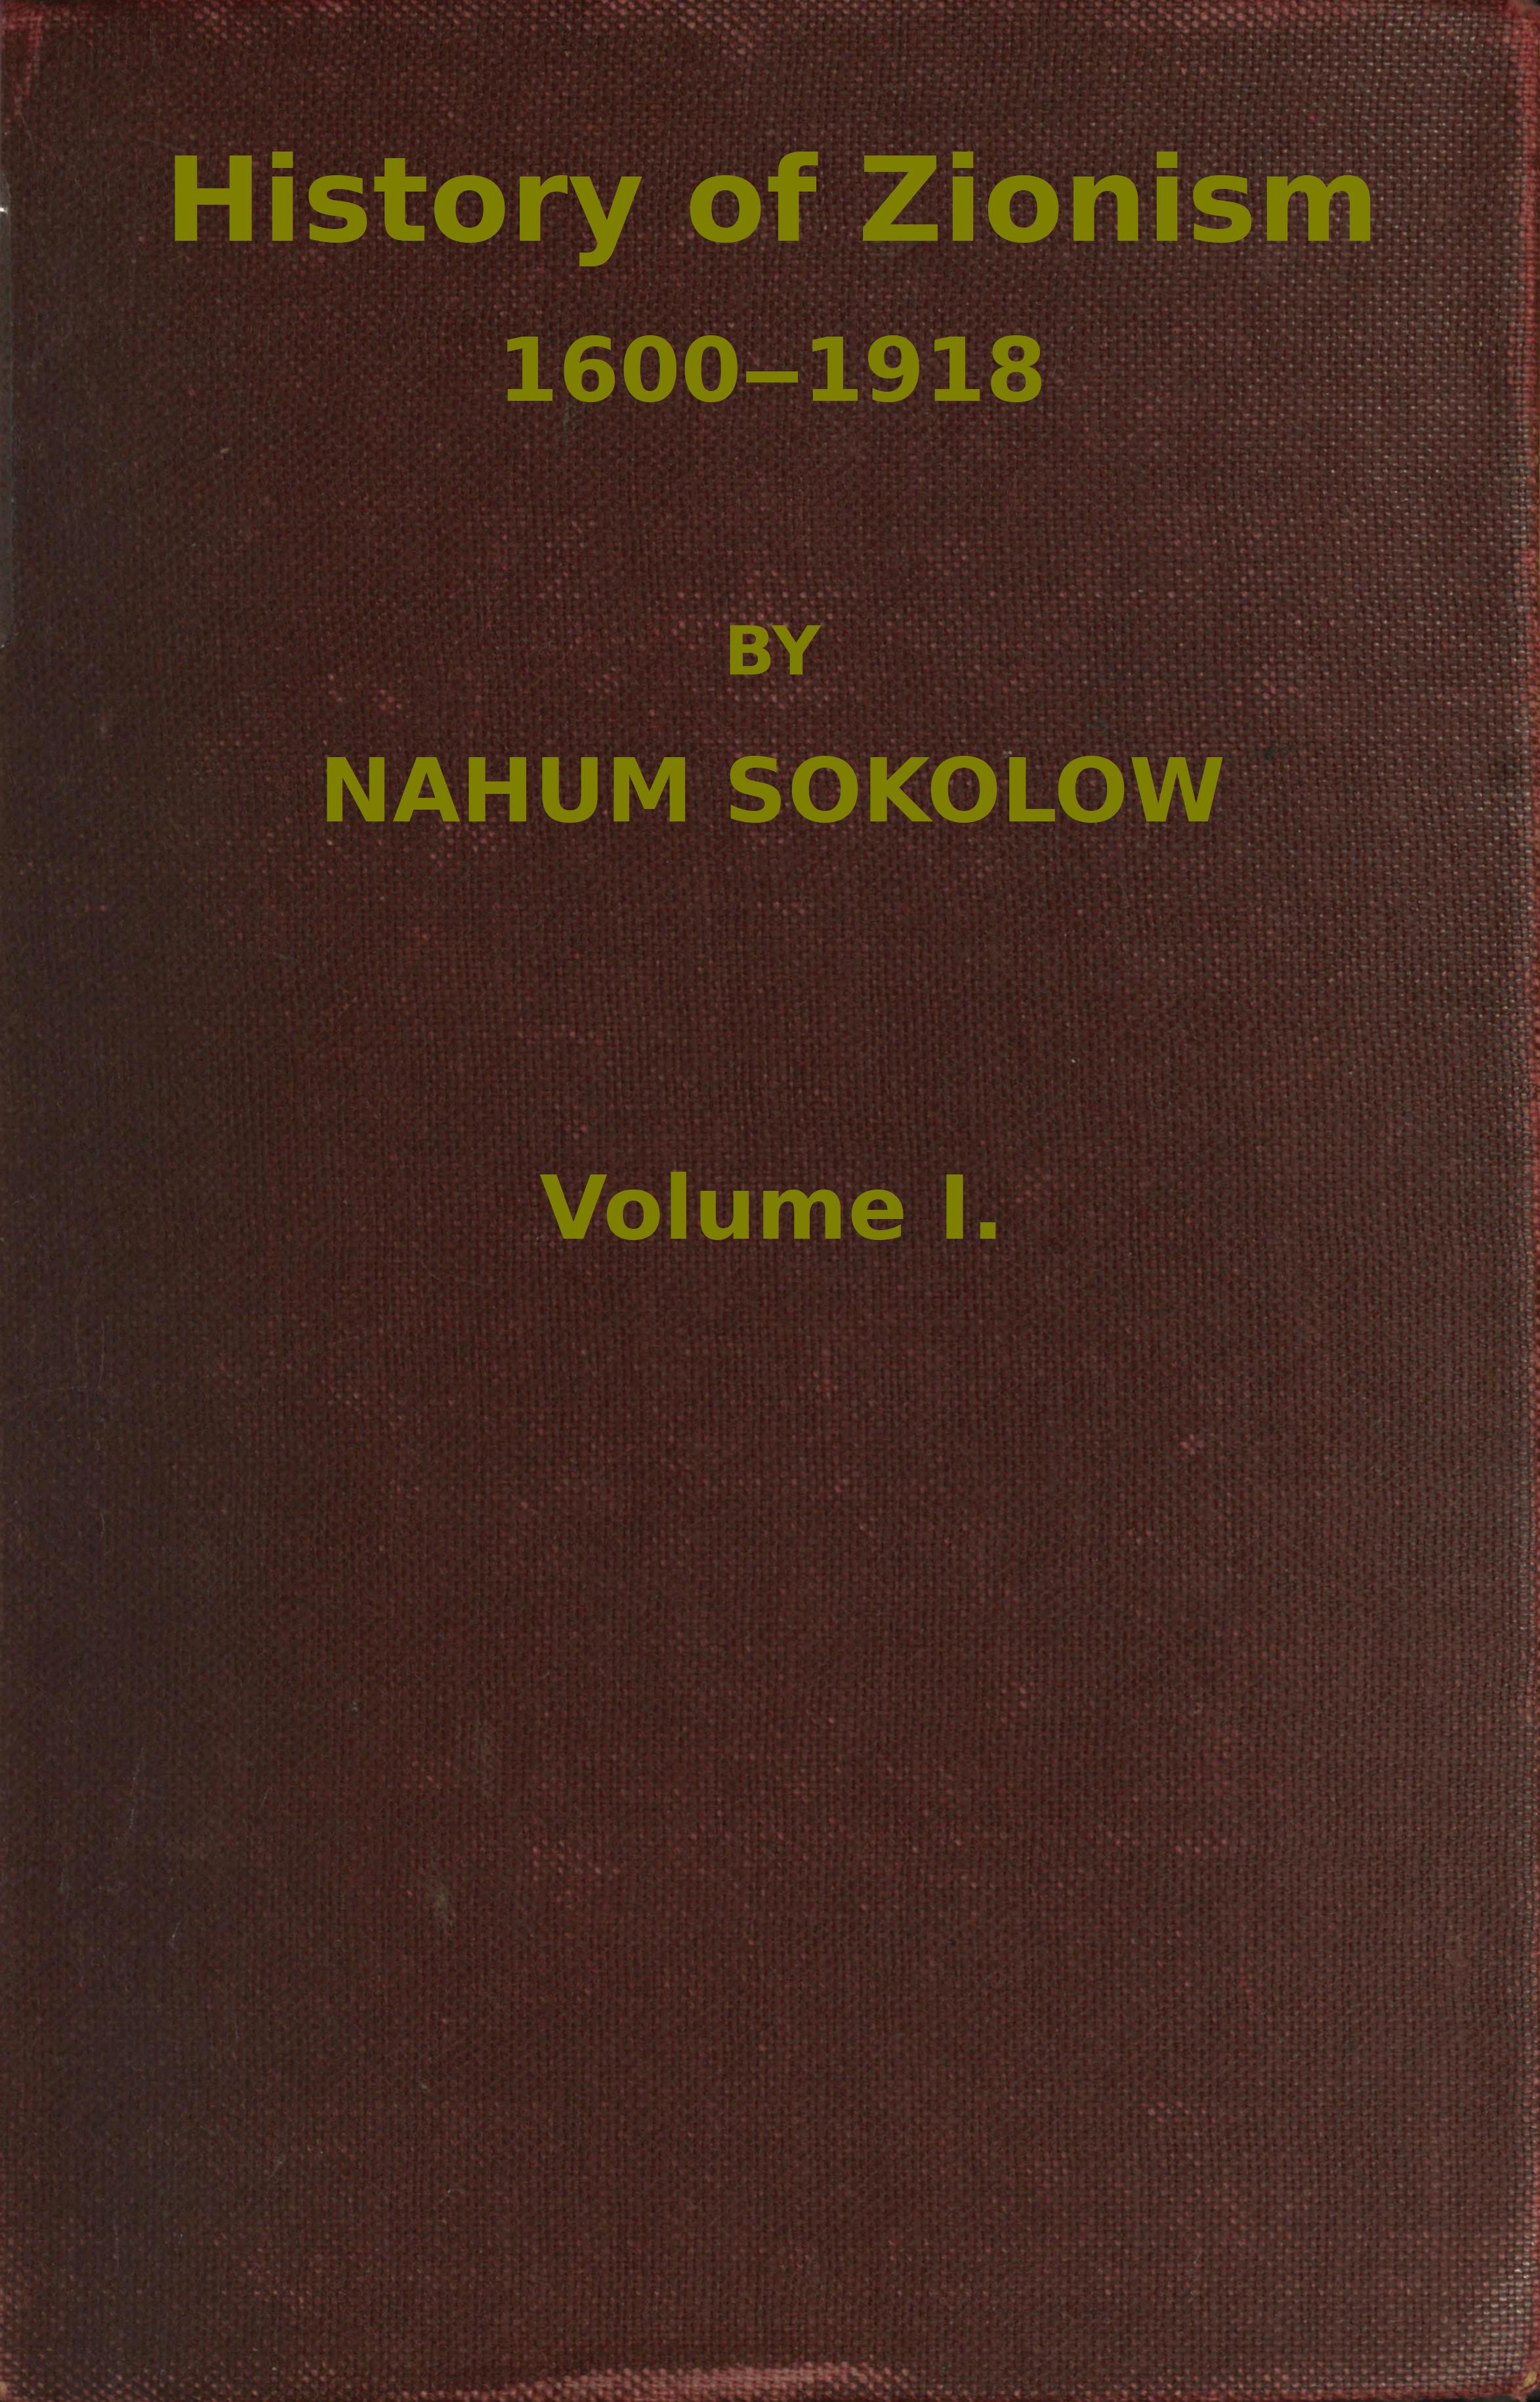 History of Zionism, by Nahum Sokolow